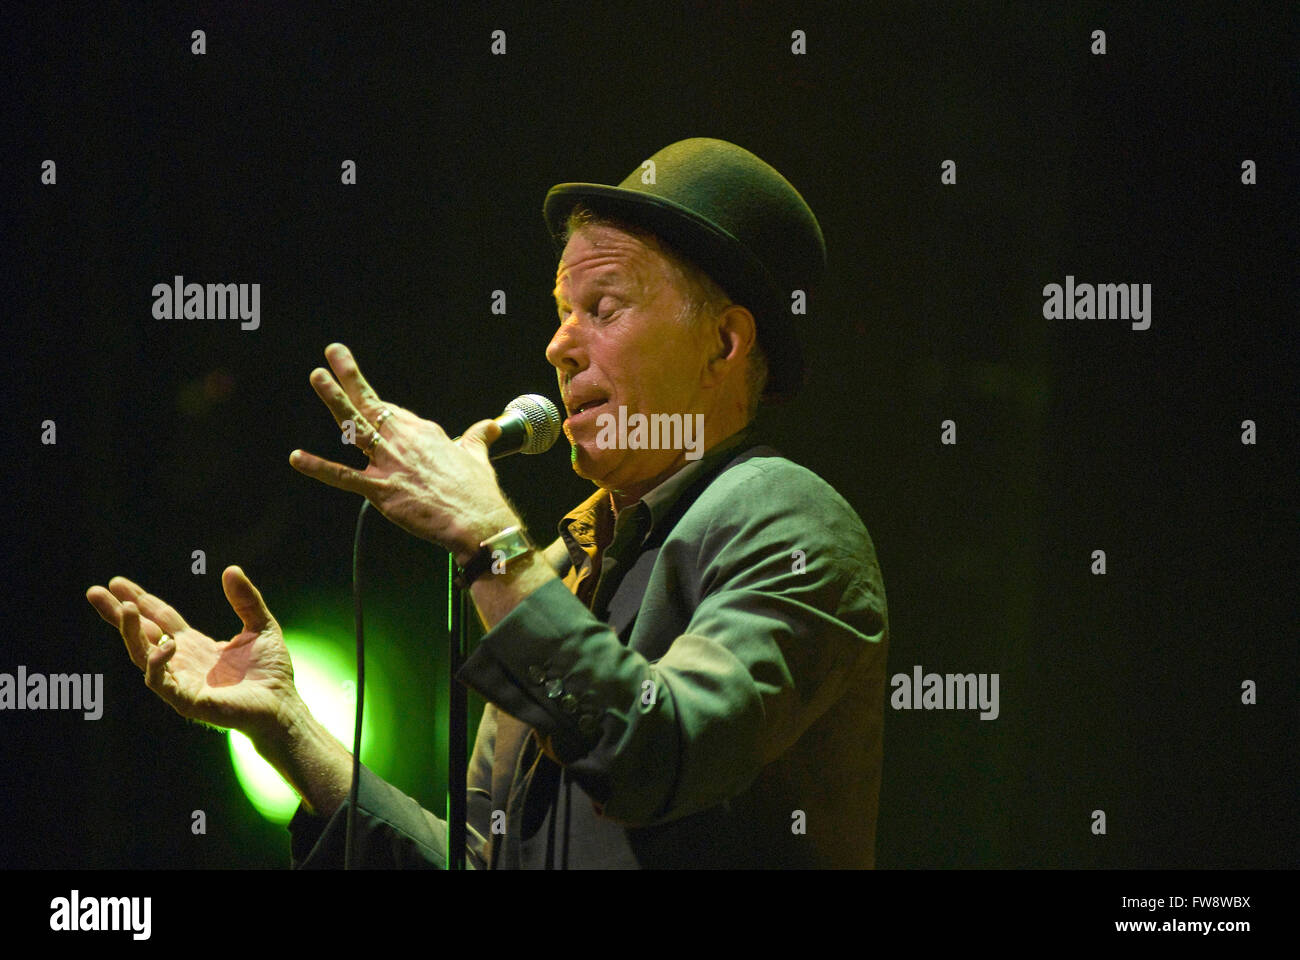 American singer/songwriter Tom Waits performing at Edinburgh Playhouse during the Glitter and Doom Tour. Stock Photo